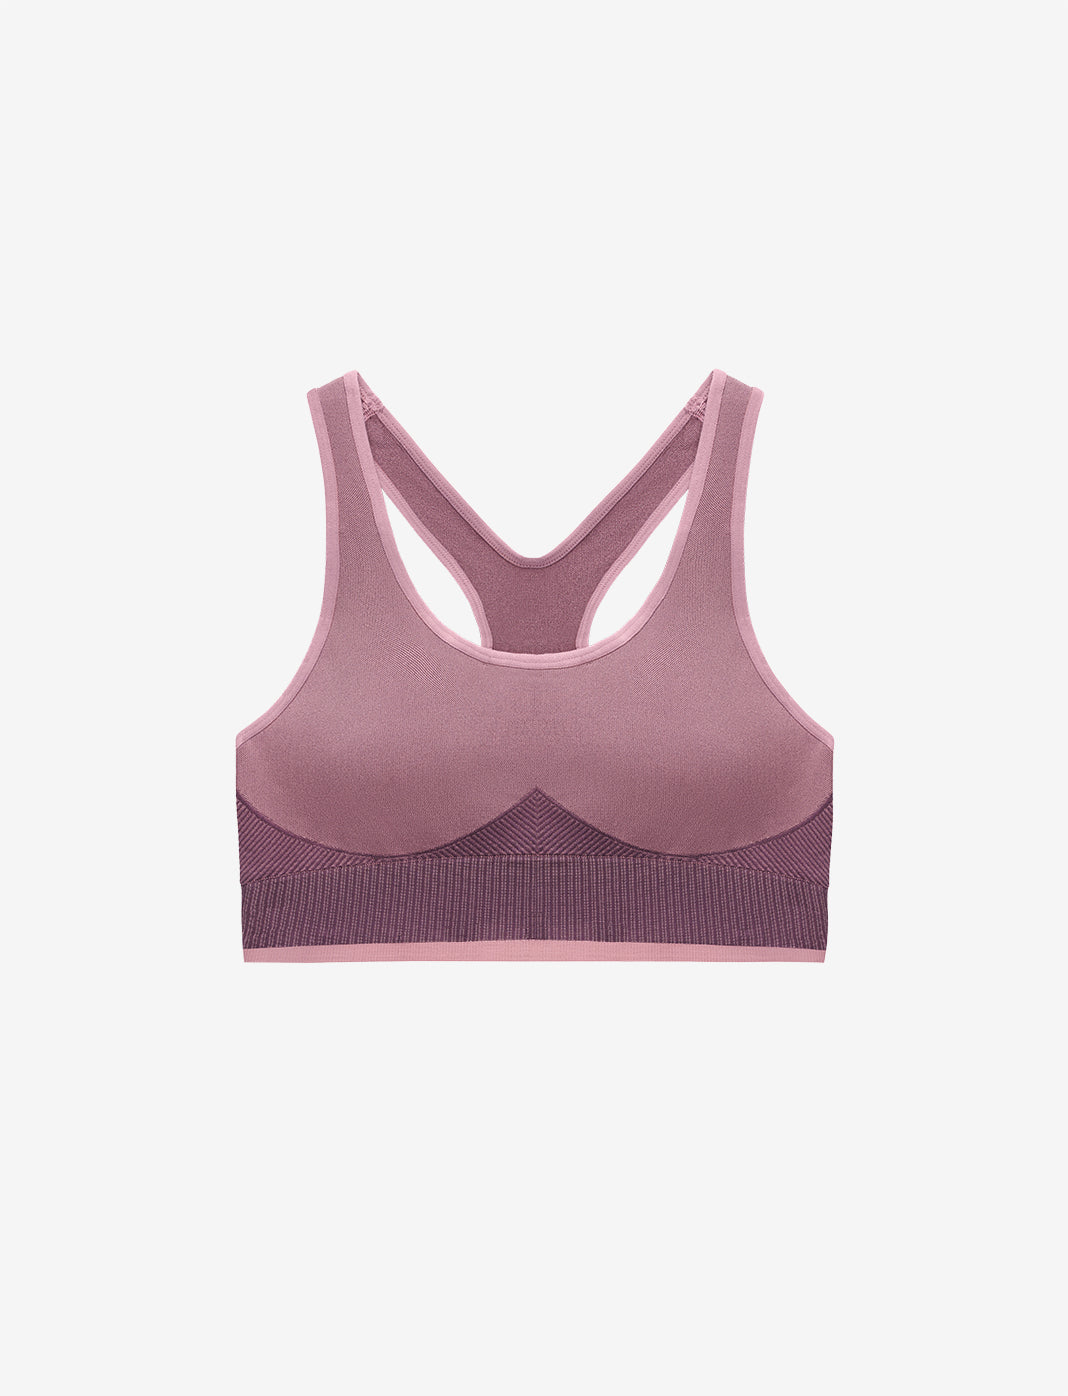 Loovoo Sports Bras for Women Racerback Padded Sexy Ribbed